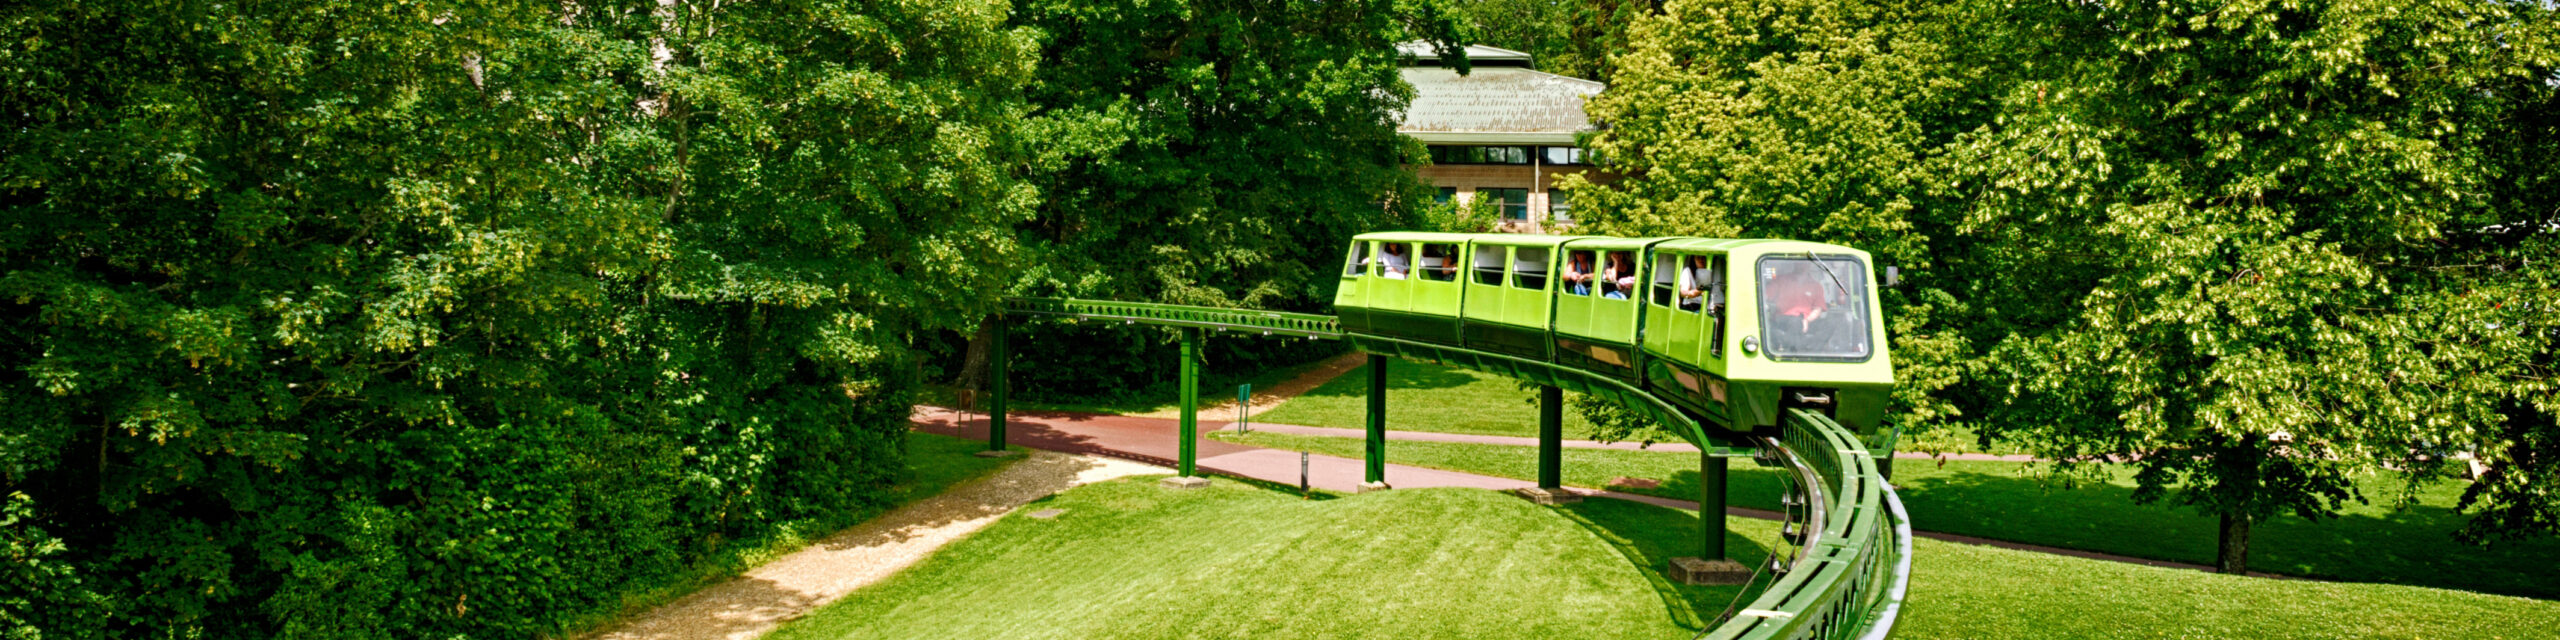 50 years of the monorail at Beaulieu